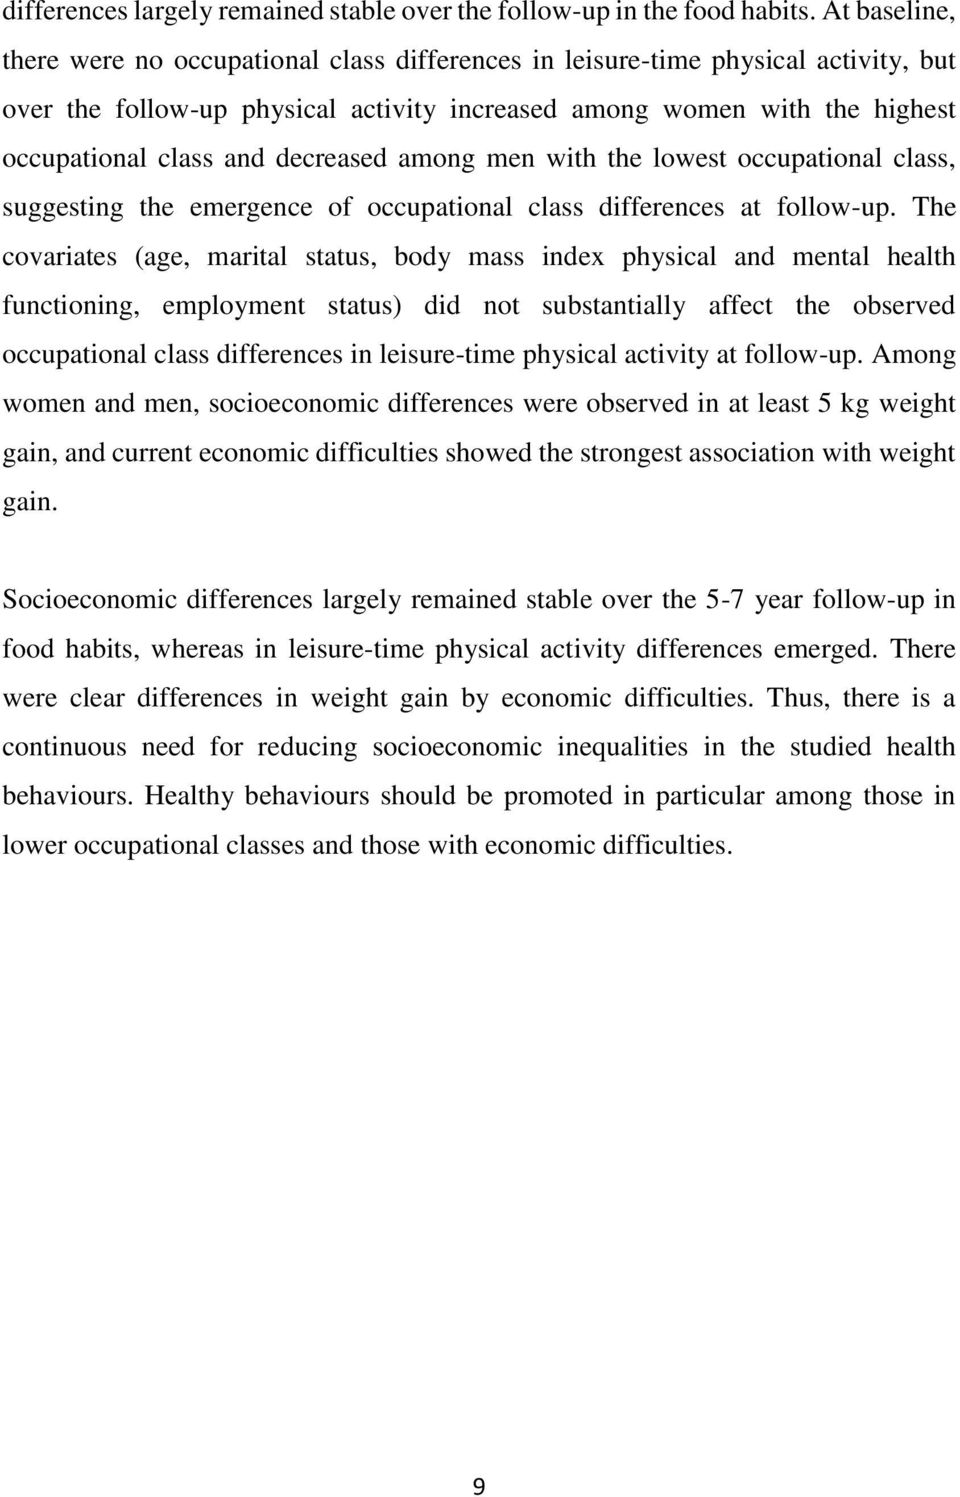 decreased among men with the lowest occupational class, suggesting the emergence of occupational class differences at follow-up.